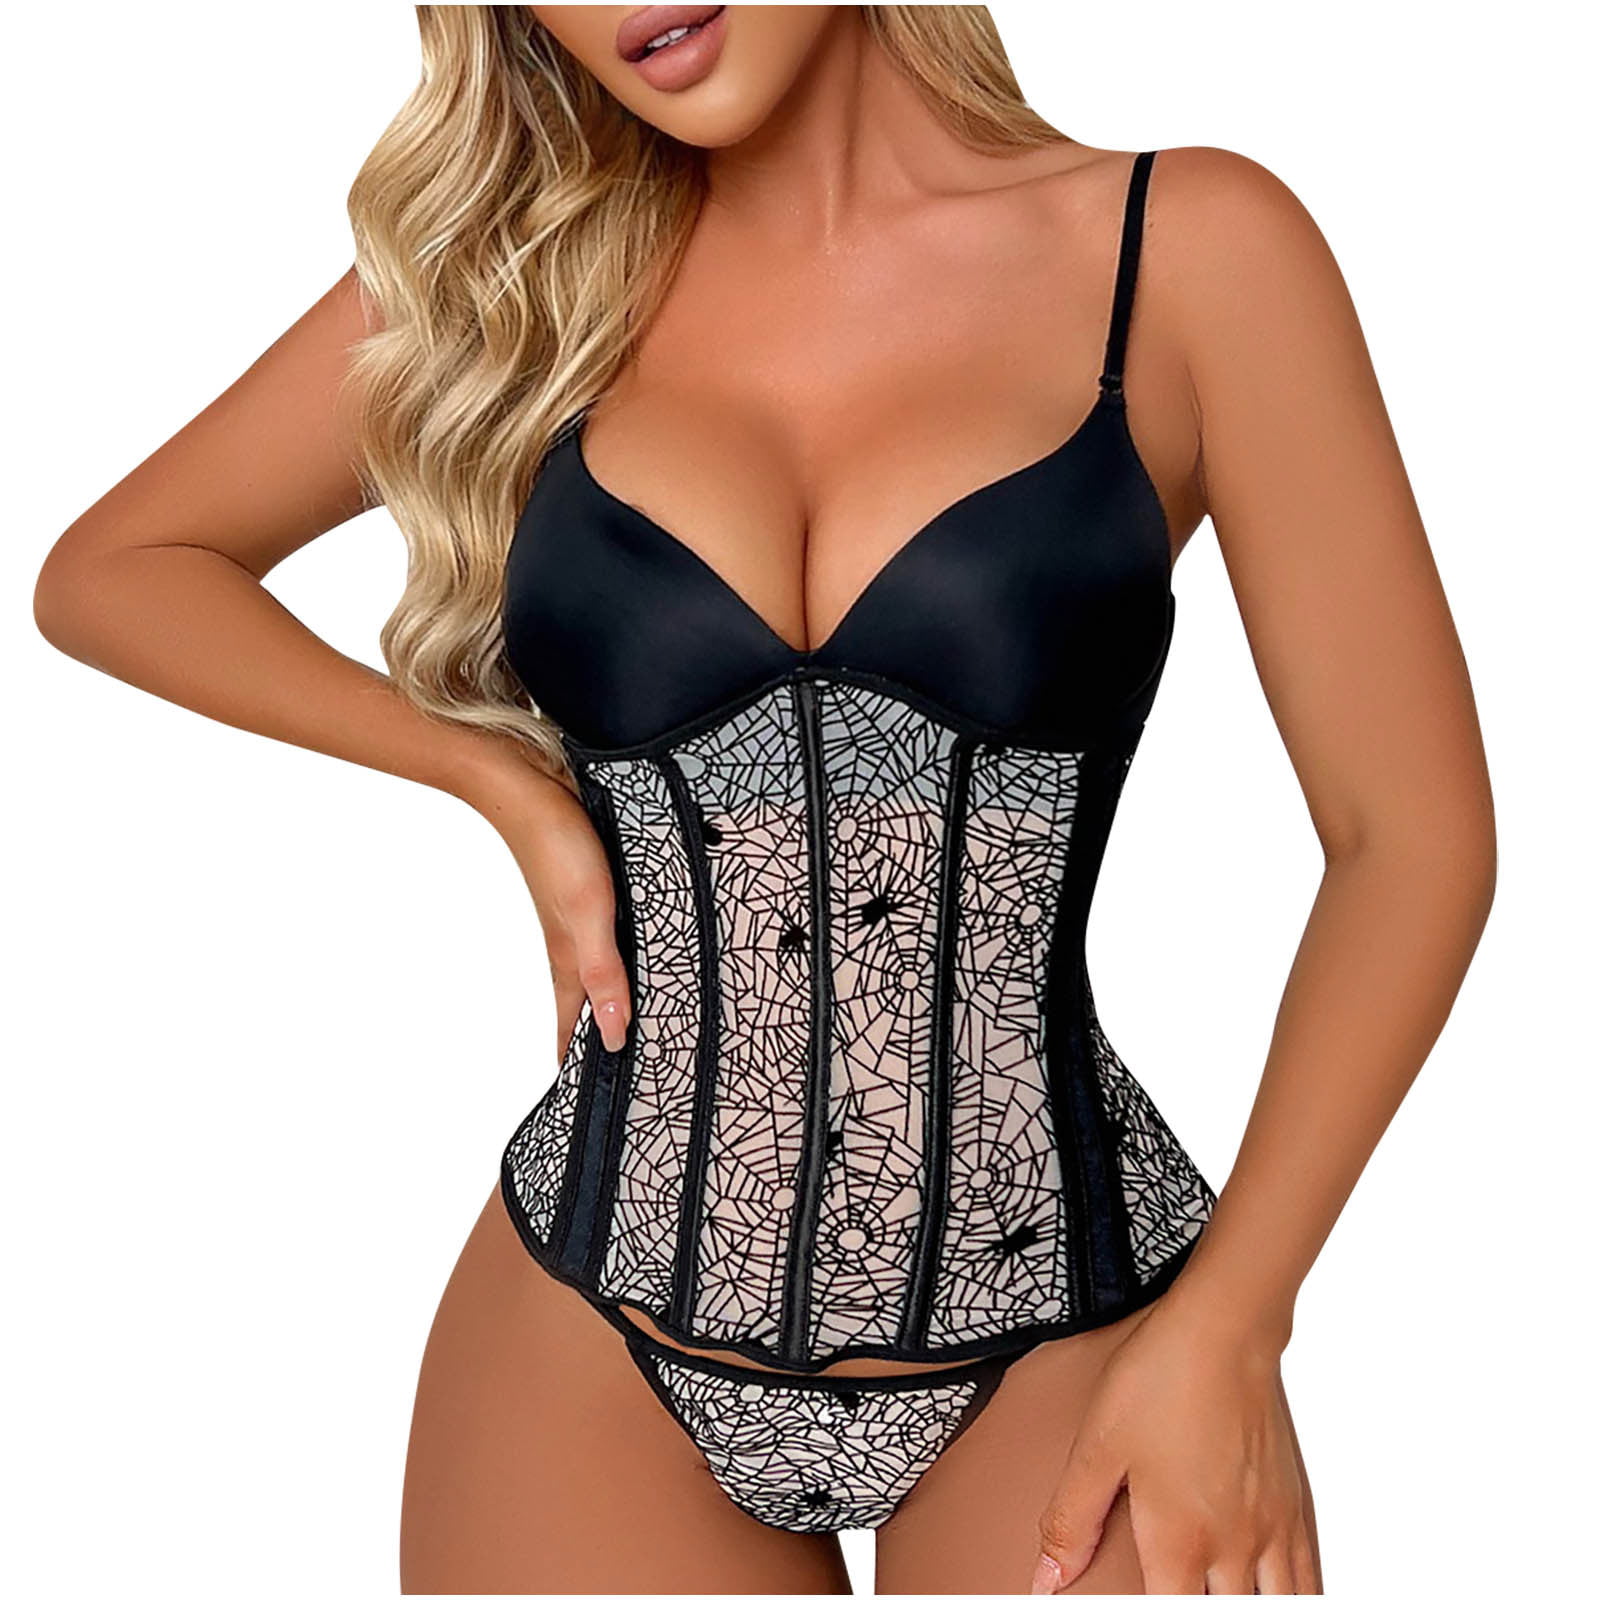 AnuirheiH Waistband Shaping Corset Women Lingerie Sets Suit Backless Lace  Up Corset Print Stitching Corset On Sale